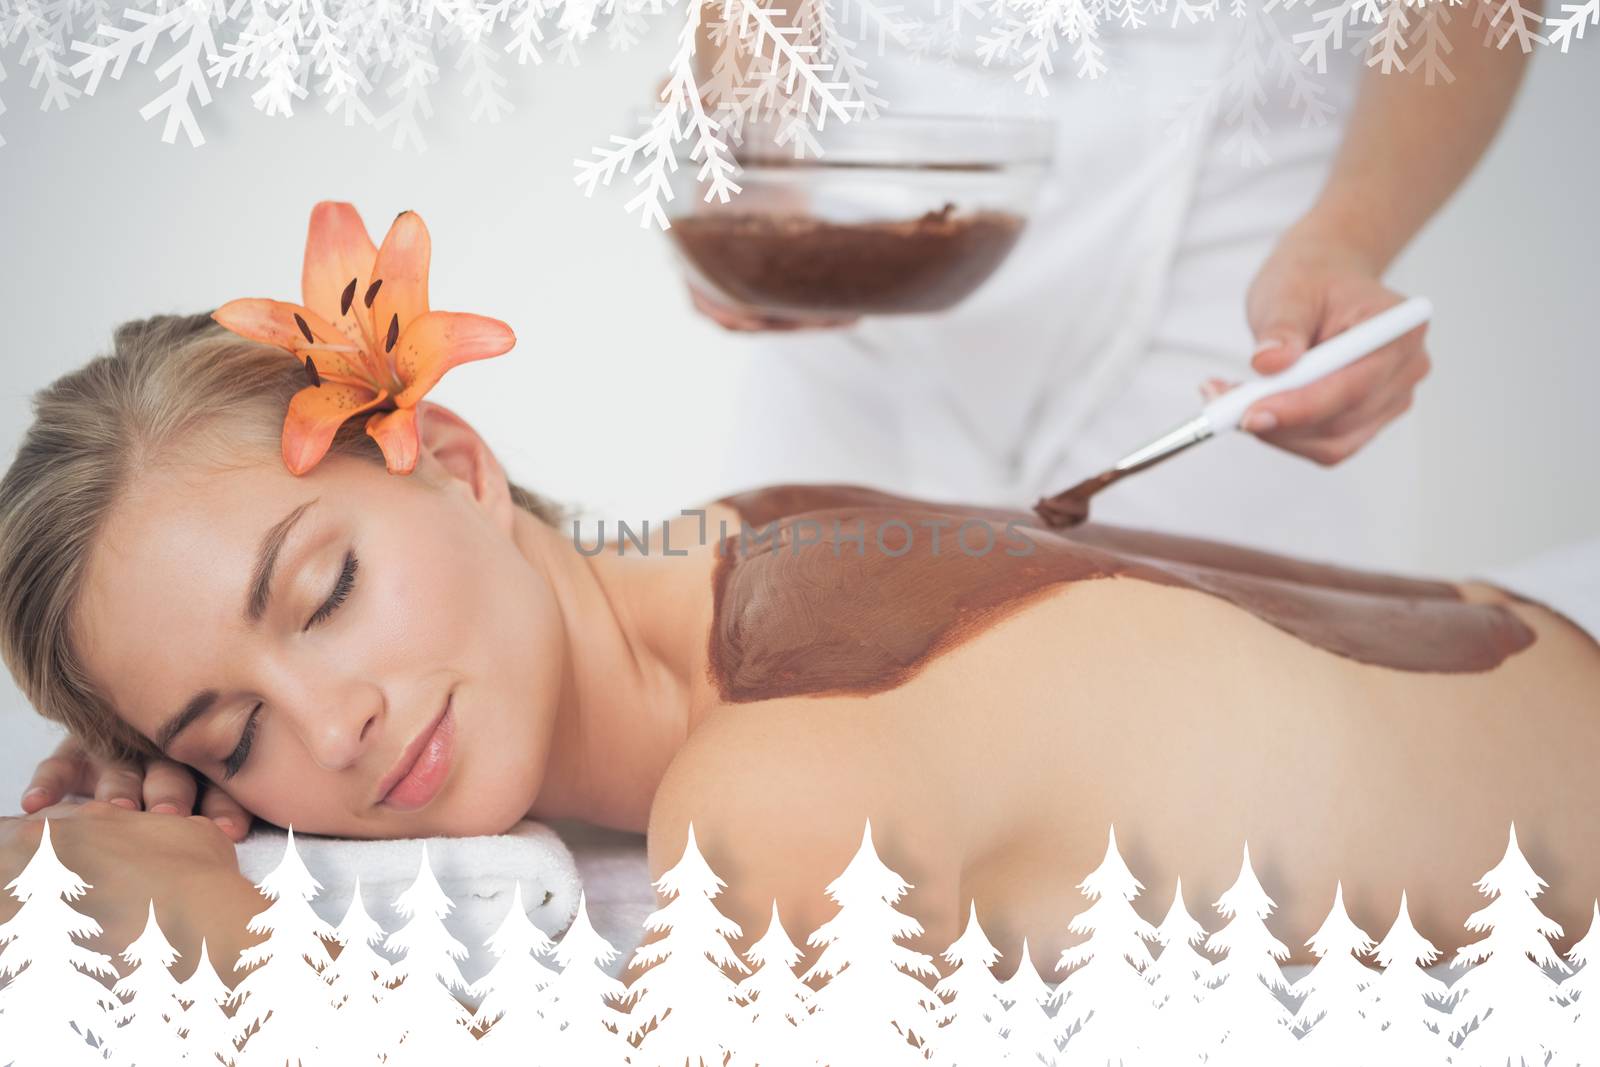 Beautiful blonde enjoying a chocolate beauty treatment  against fir tree forest and snowflakes